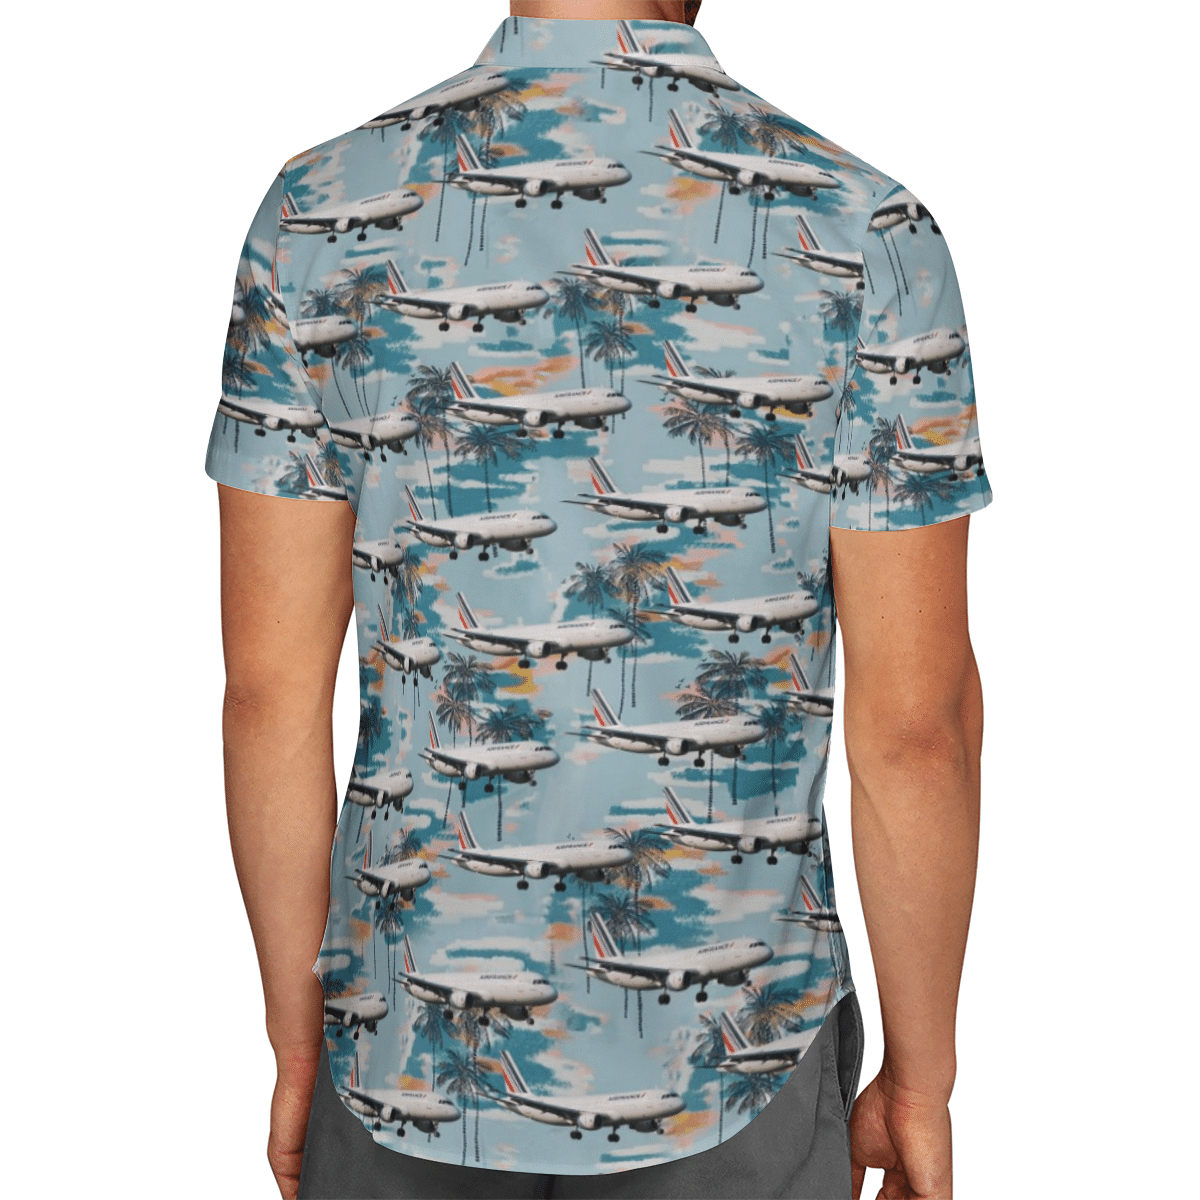 Going to the beach with a quality shirt 176